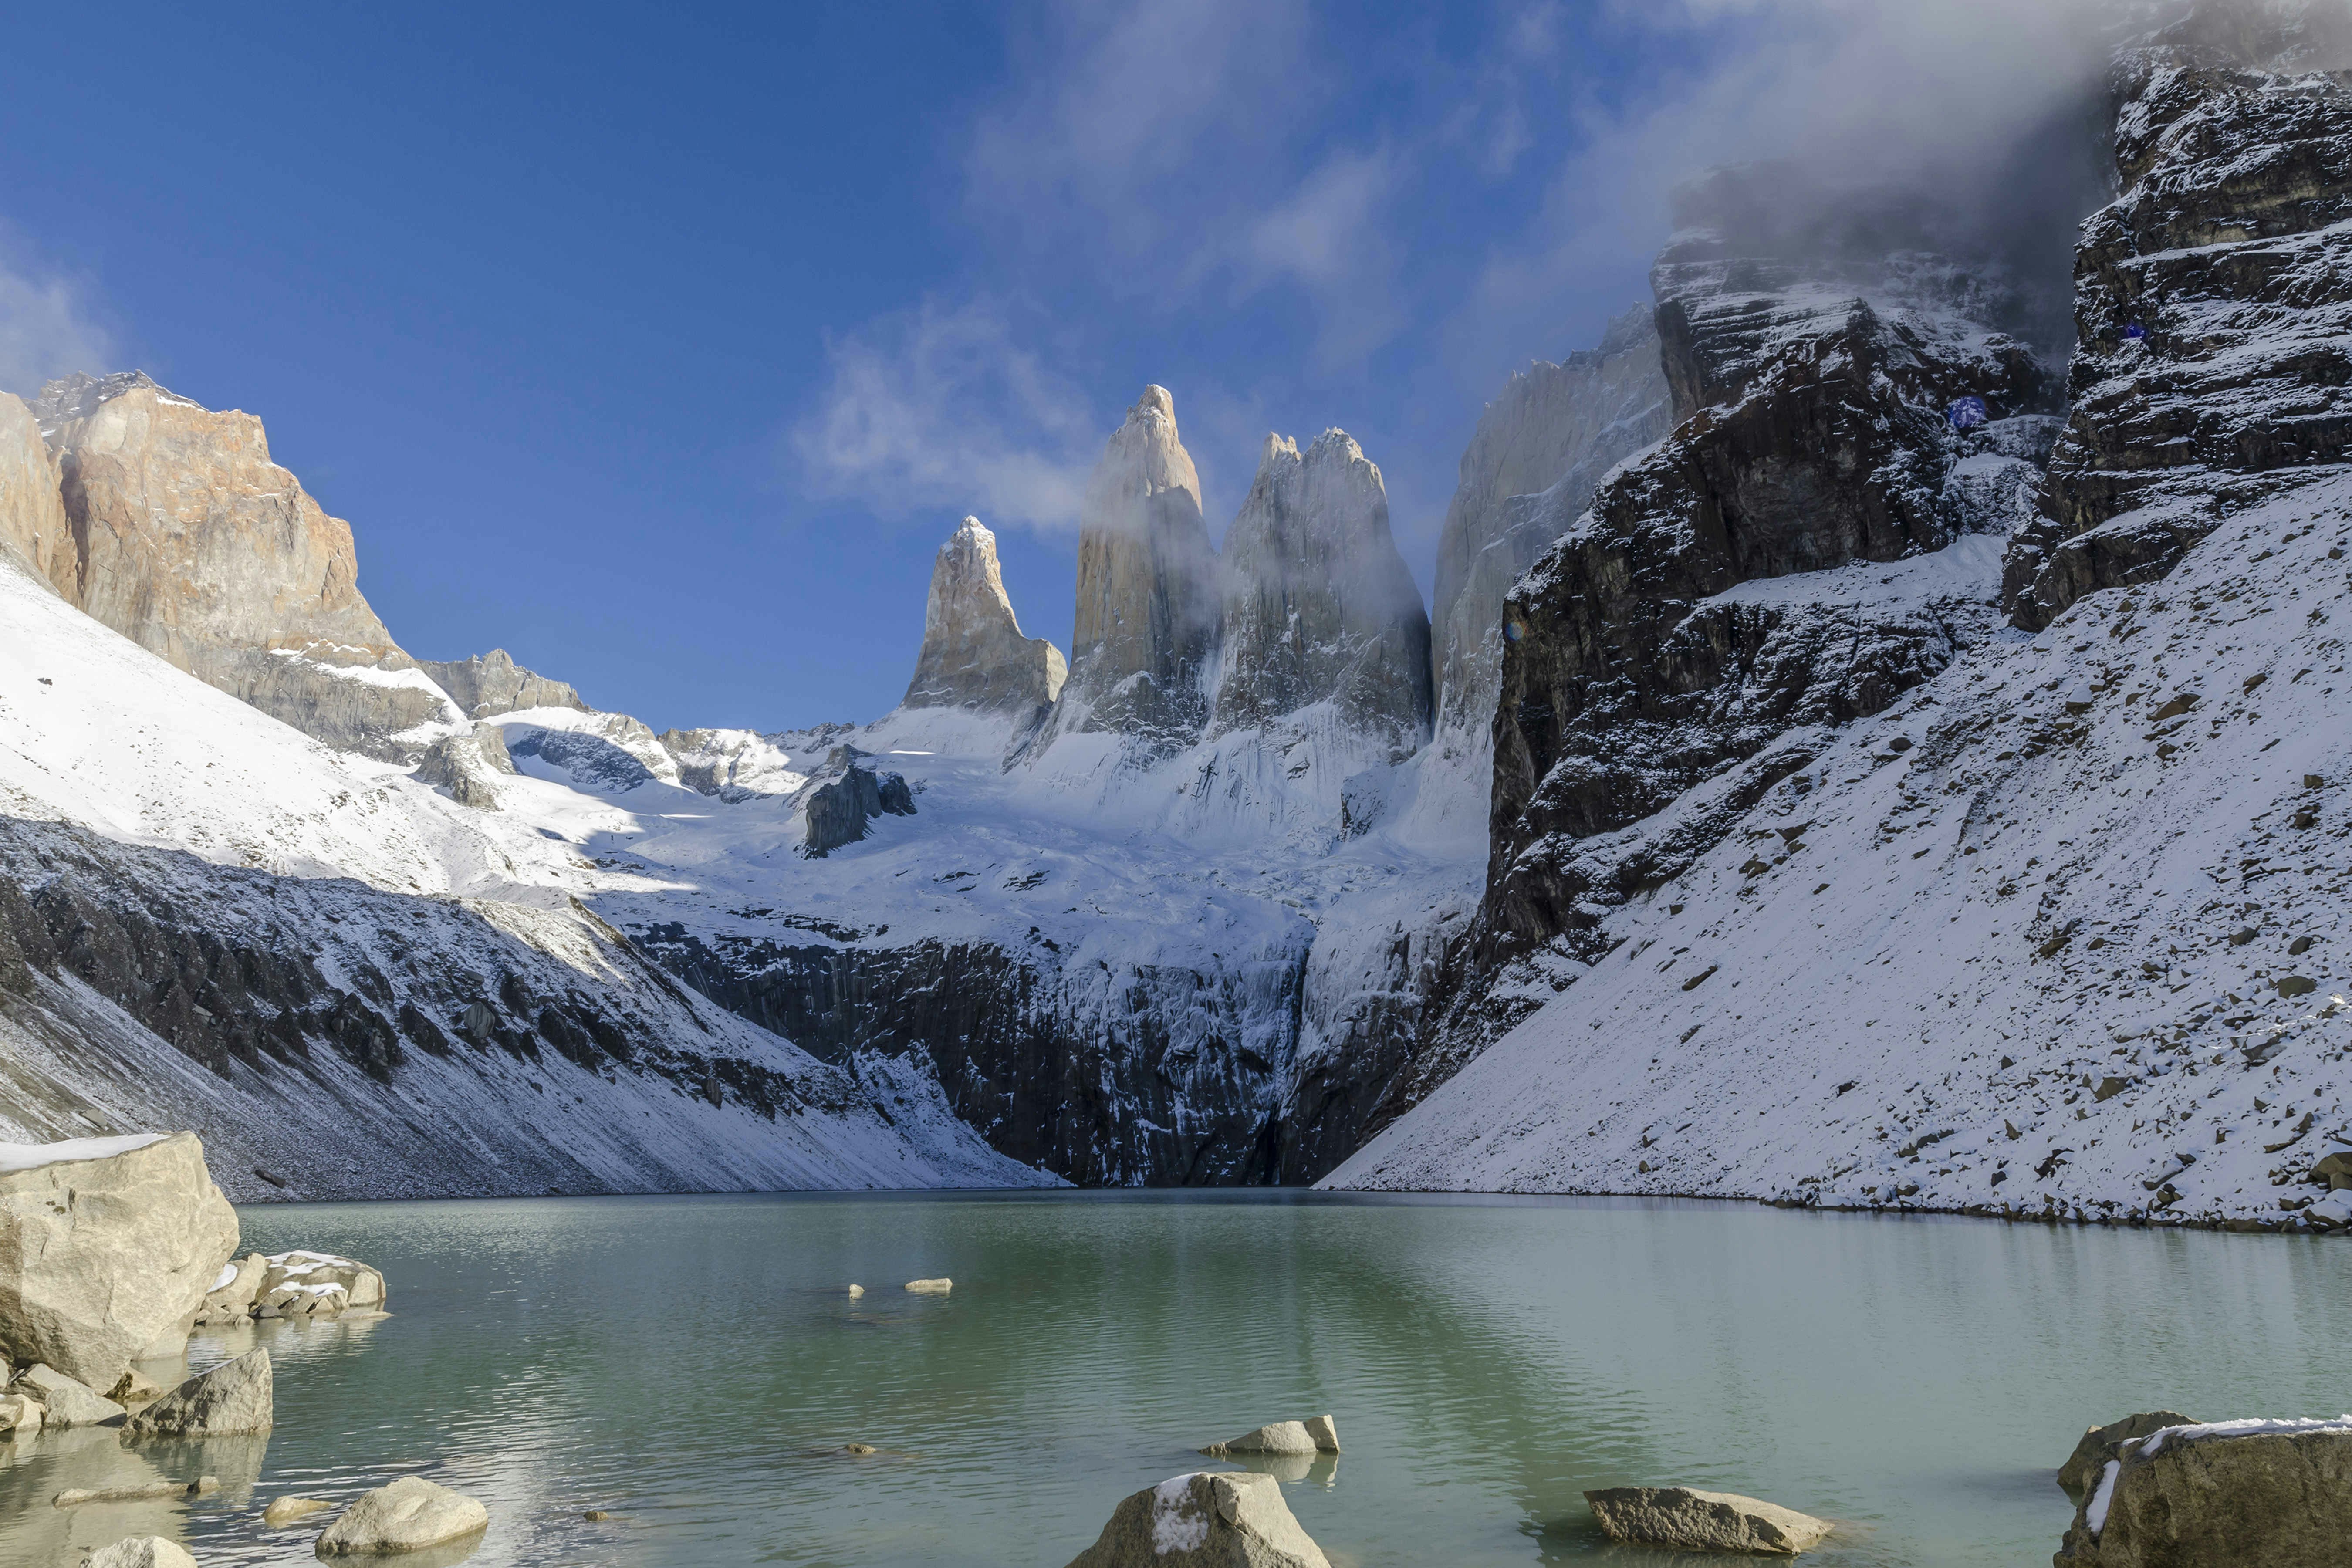 Base of Torres del Paine.